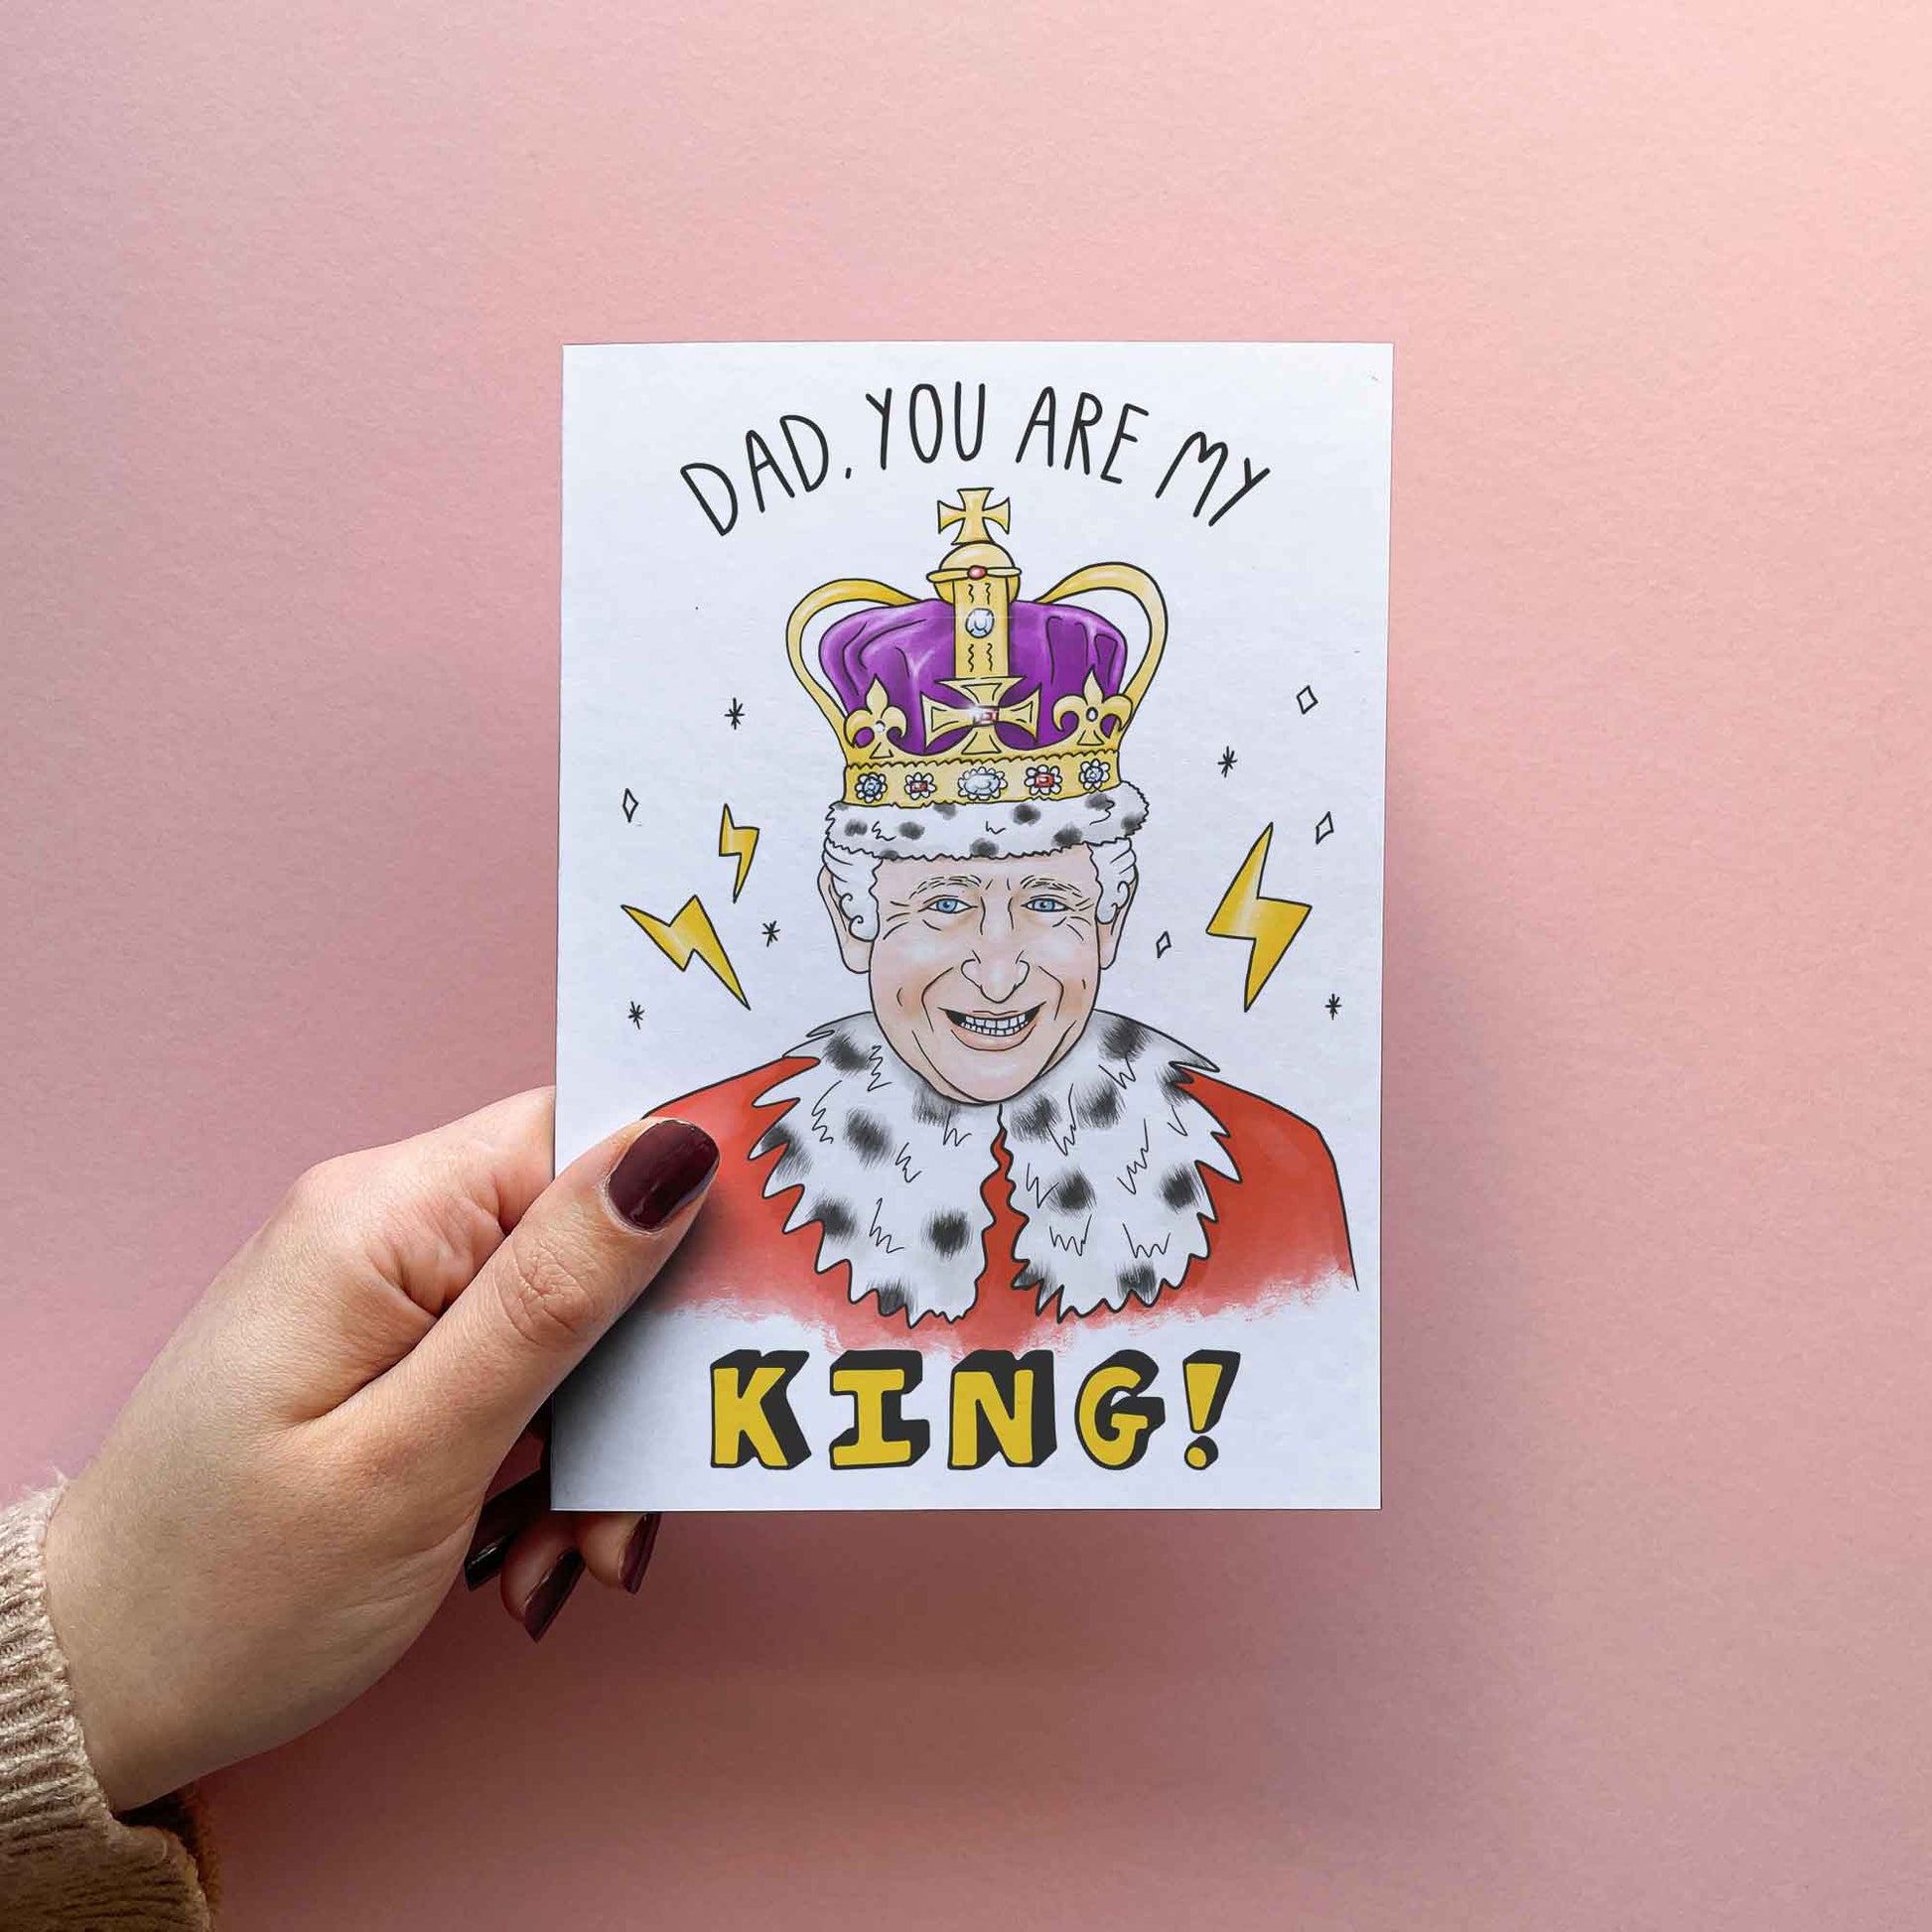 Funny Fathers Day card for Dad, reading: "Dad, you are my king!" illustration of King Charles III wearing crown. If your father jokes about being his royal highness then pair this funny father's day card with a cool gift for dad and make his day! Card shown in hand for size reference.